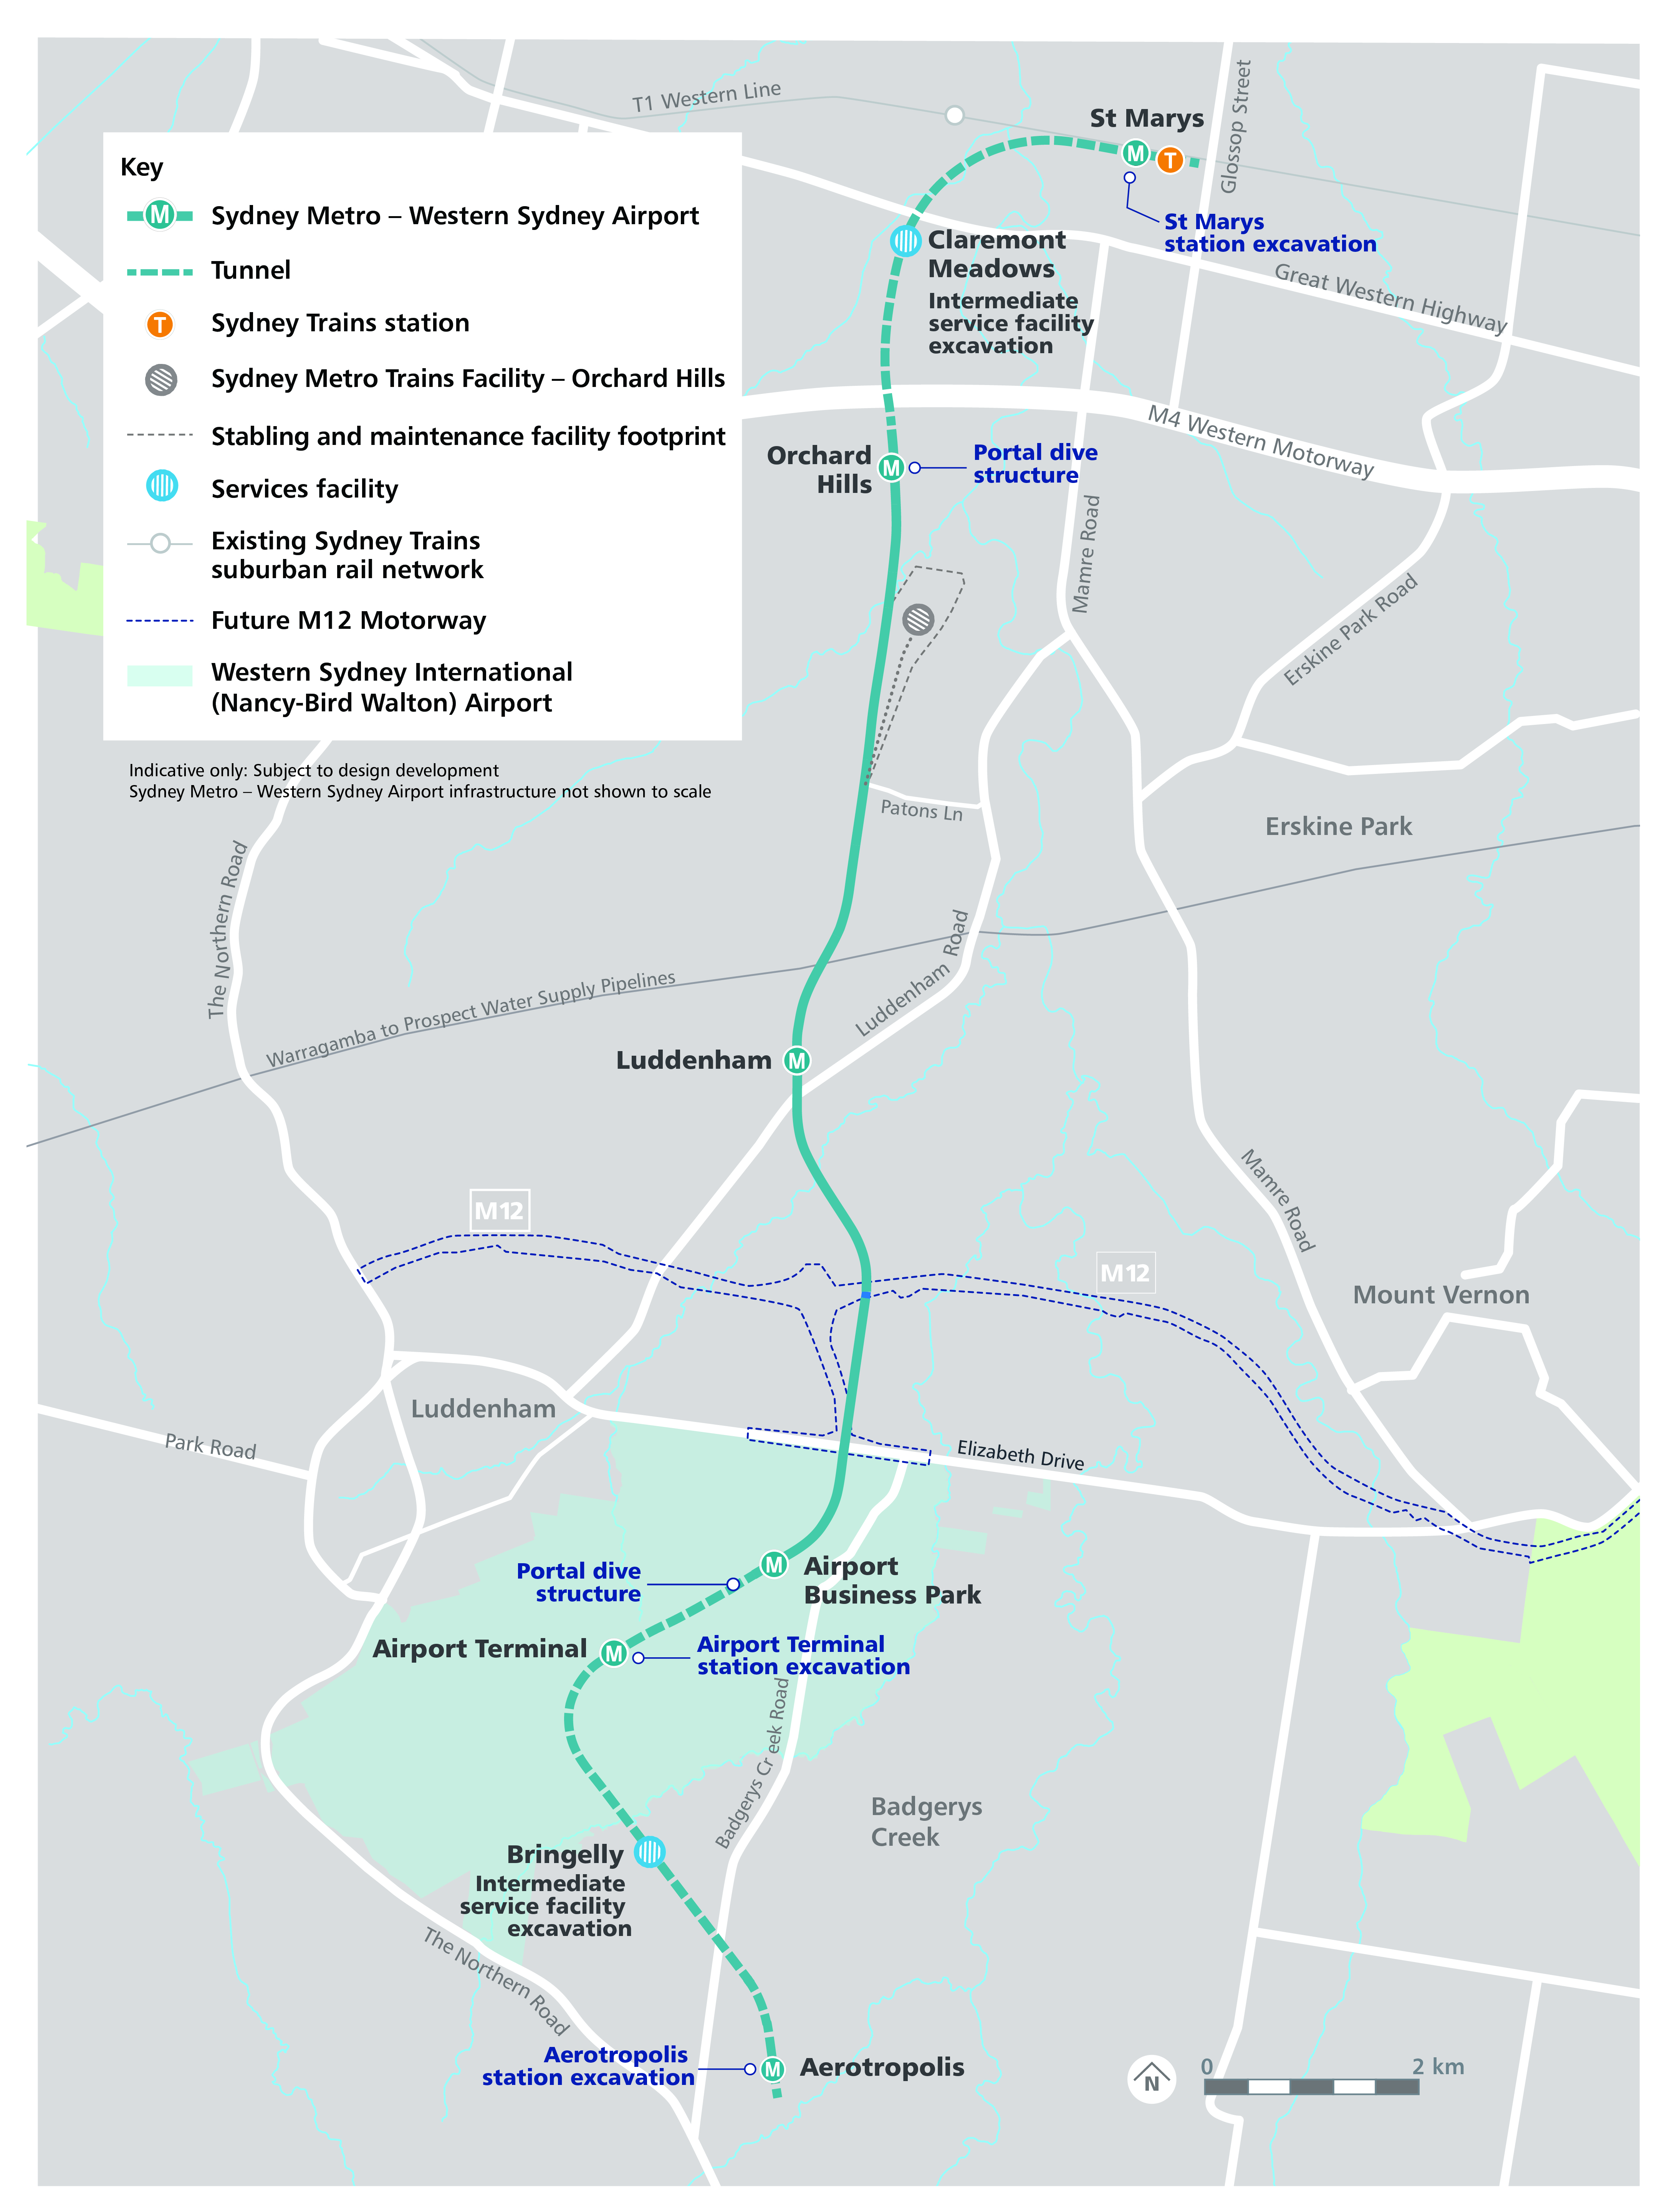 Map of Sydney Metro Western Sydney Airport line extending from St Mary's metro station to the future Aerotropolis station via the new Western Sydney International (Nancy-Bird Walton) Airport station.